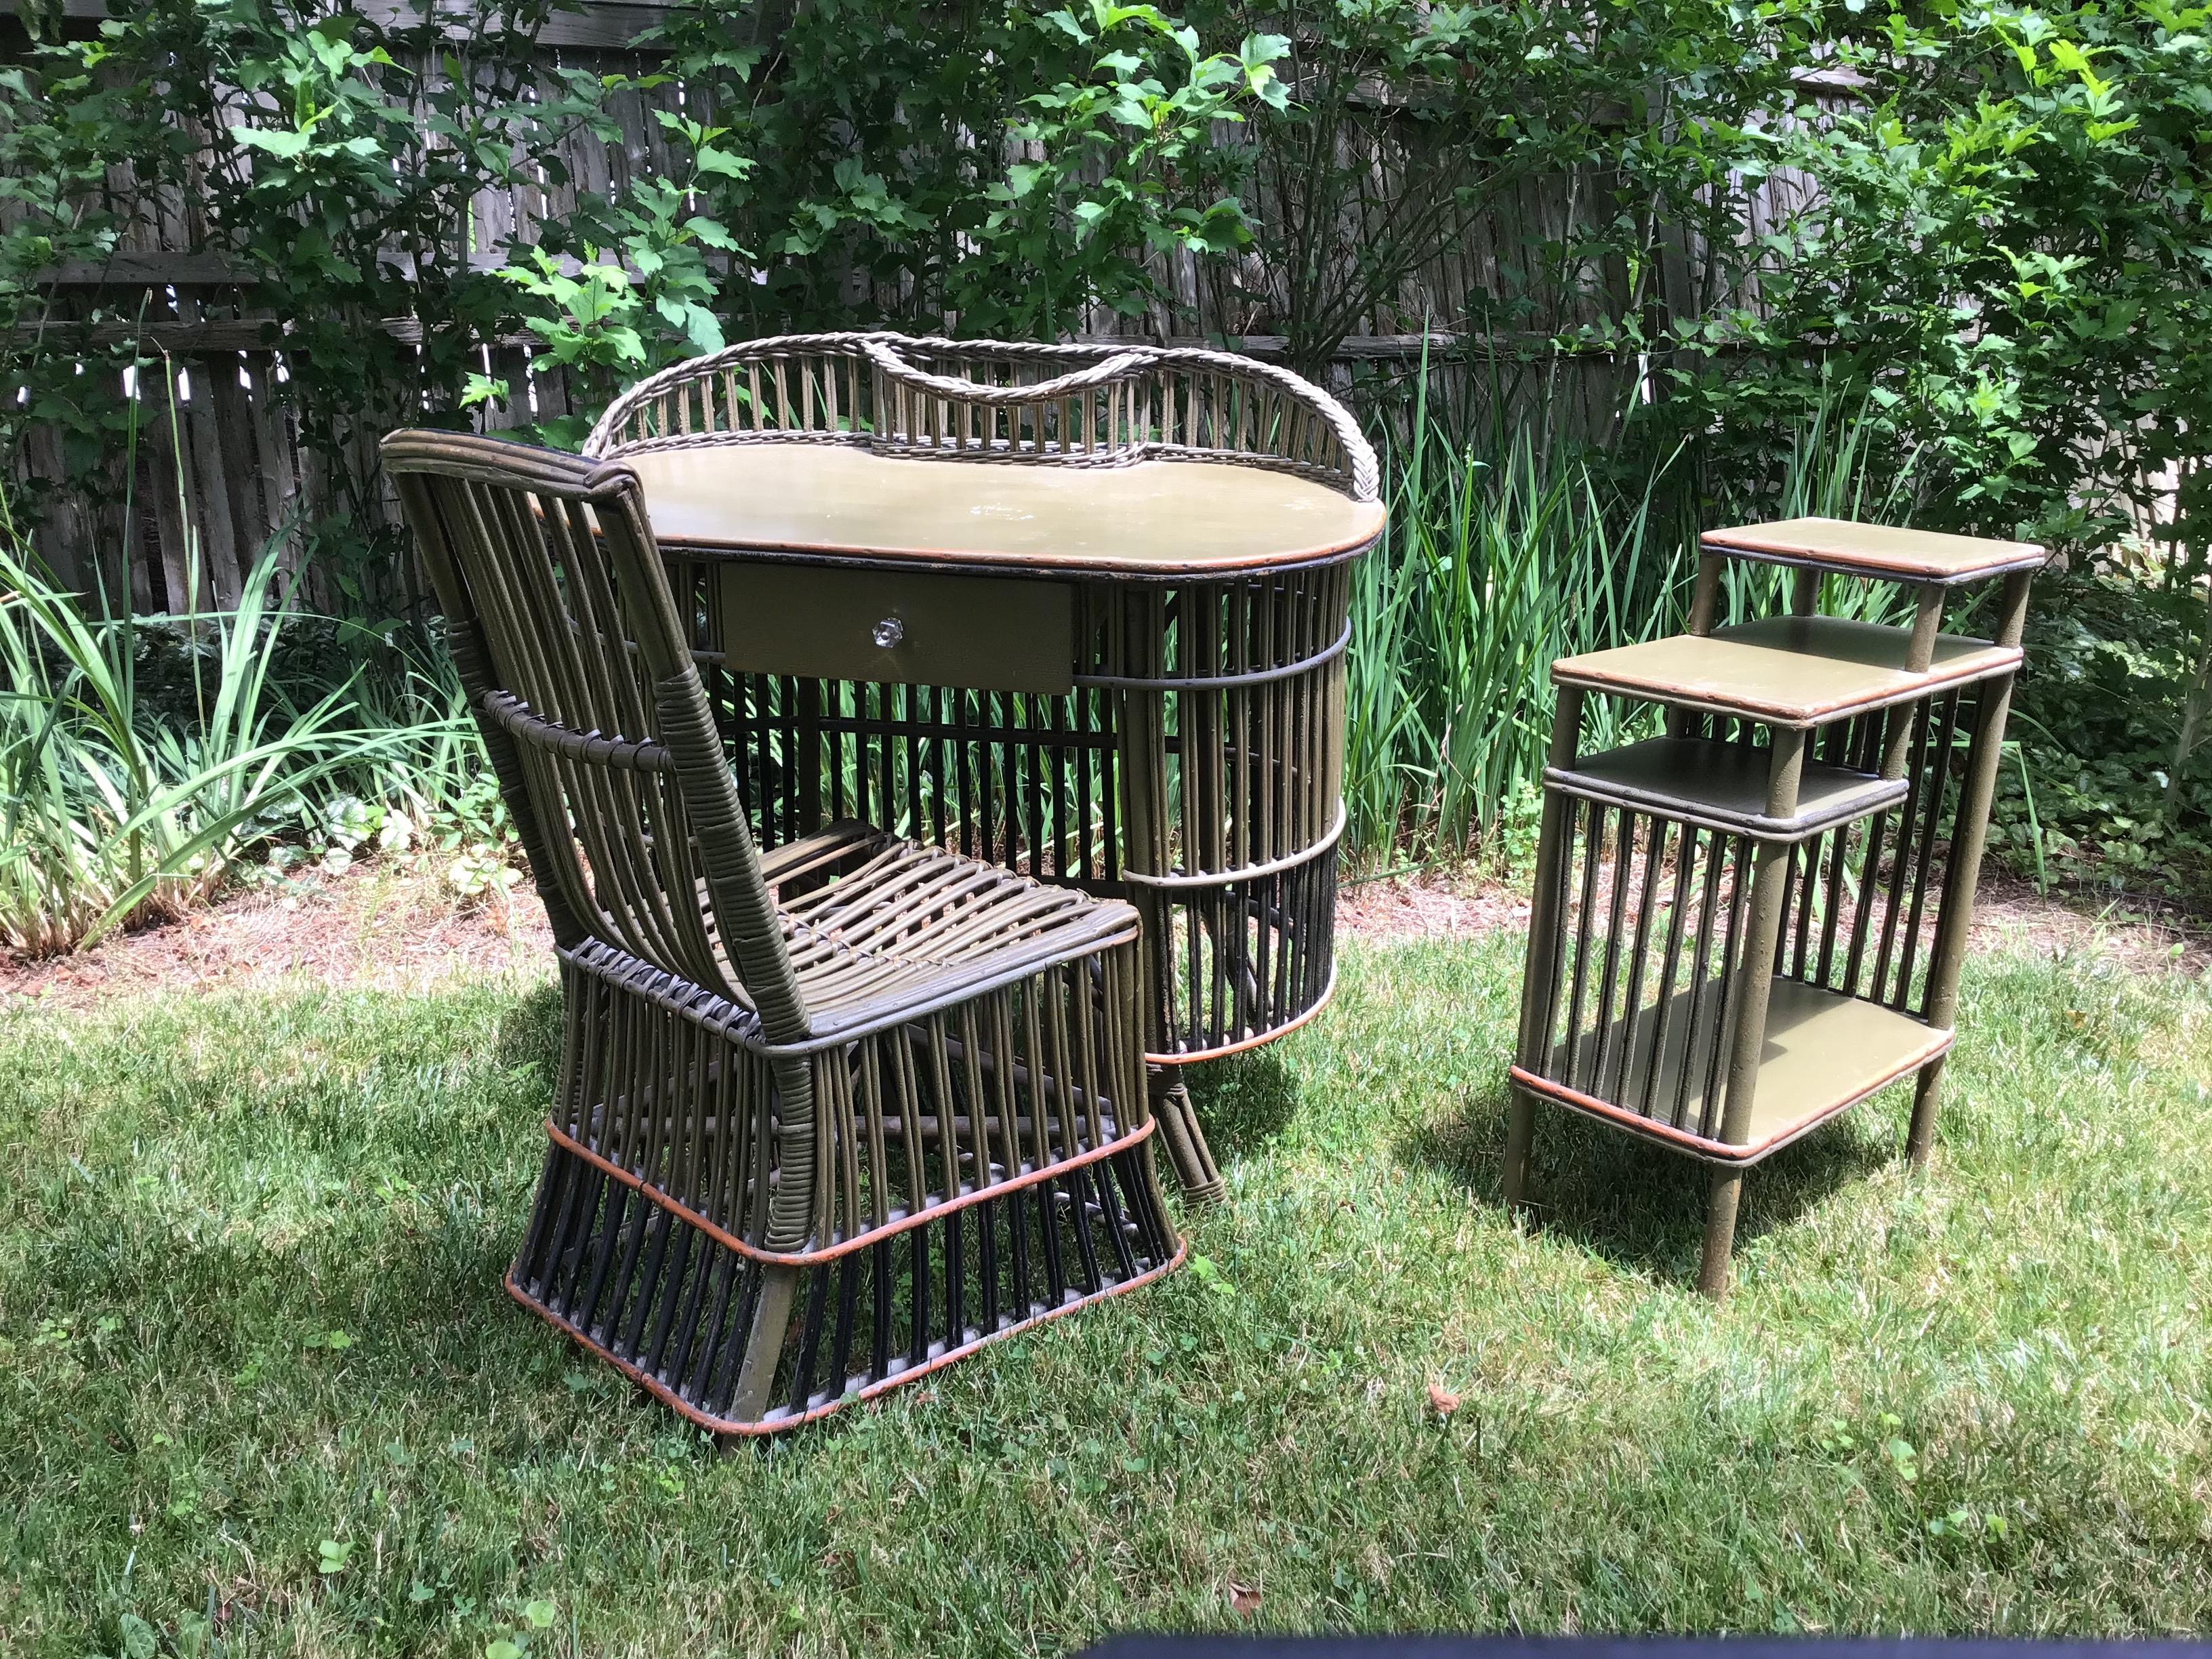 Antique Wicker Desk with Chair and Telephone Table, Arts and Crafts Style 3 piece wicker set has original paint and crackle patina, top has minor scratches, chair has minor losses to seat; the pieces are save din the desk drawer and can easily be